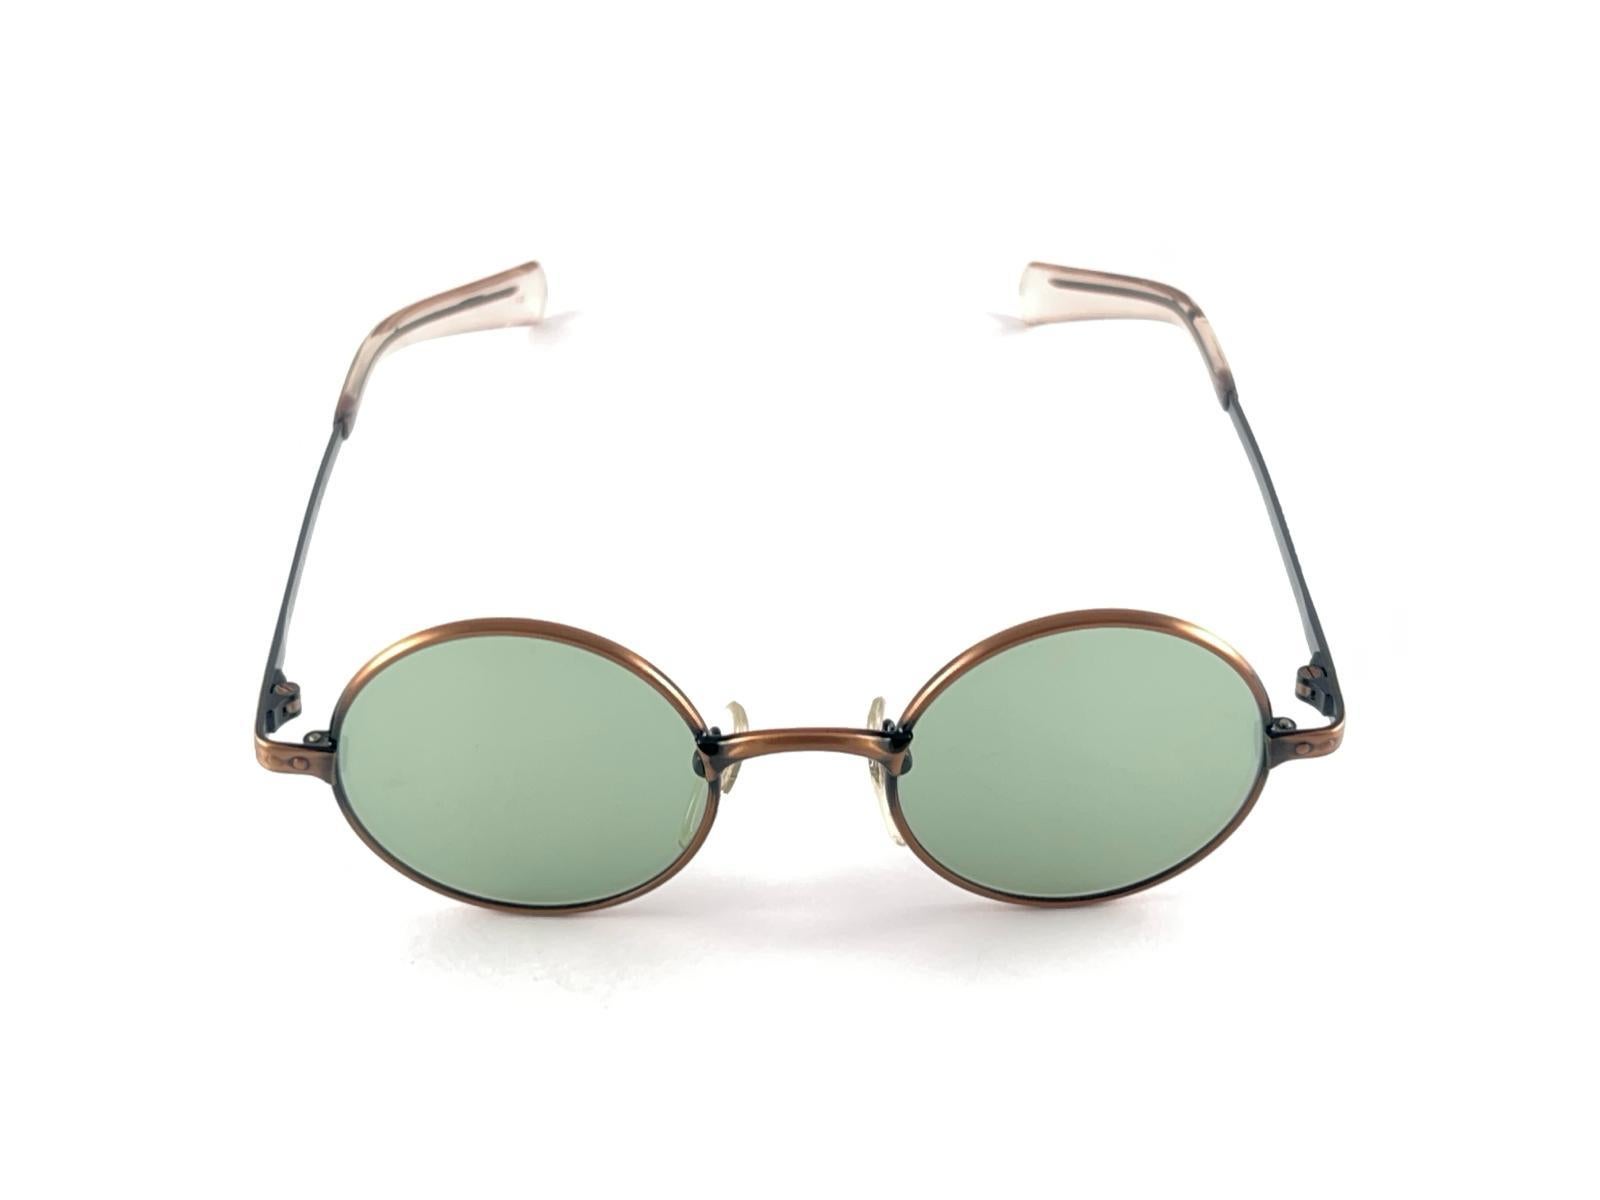 New Vintage Jean Paul Gaultier Junior 57 0173 Small Round Leon Japan Sunglasses  In New Condition For Sale In Baleares, Baleares